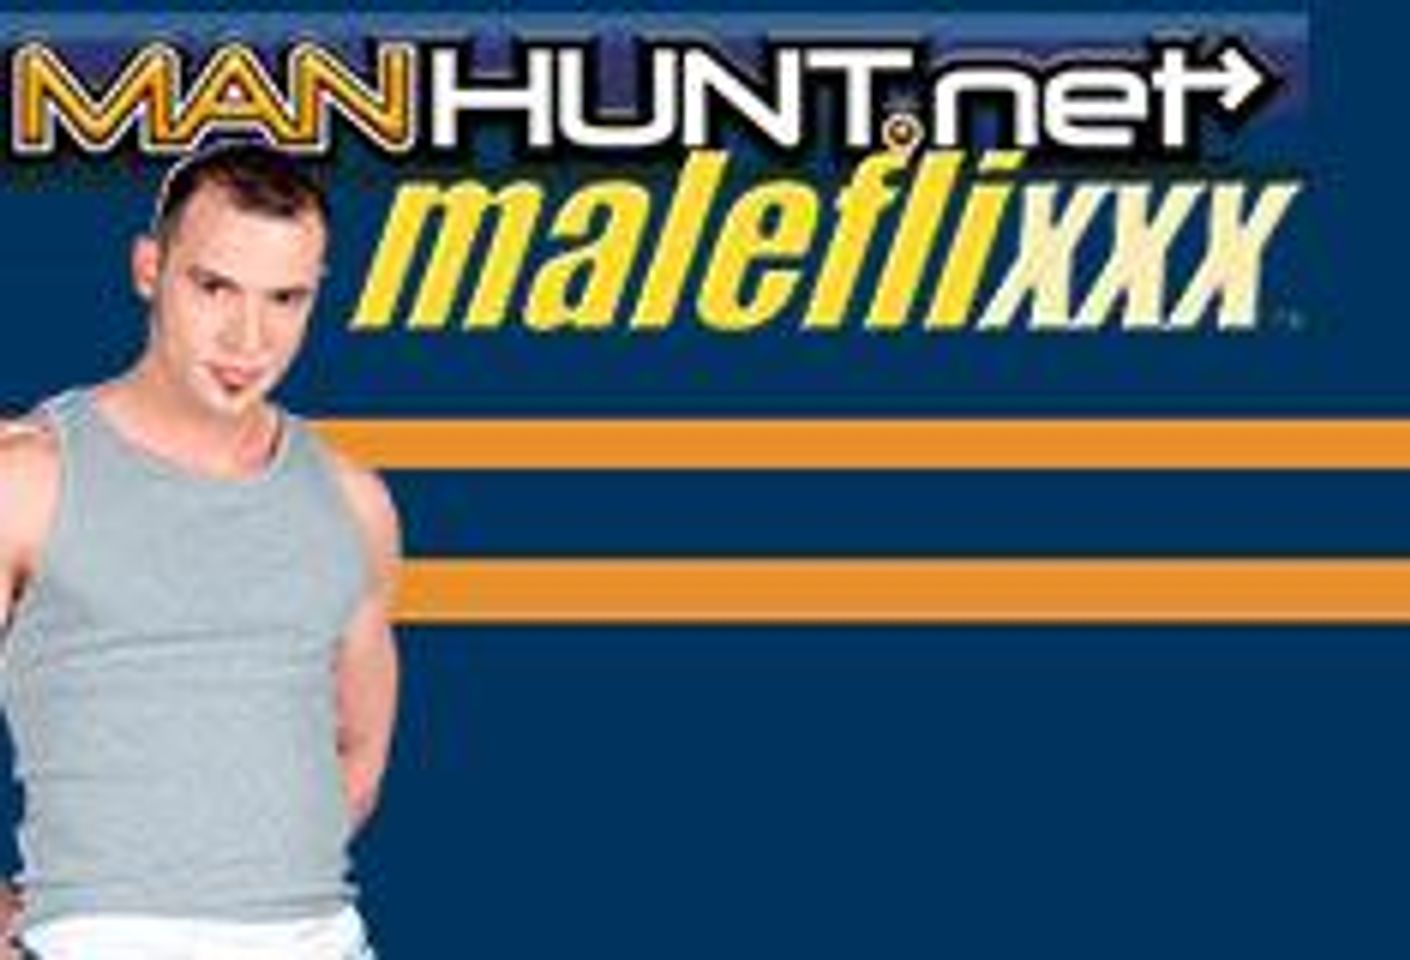 Maleflixxx and Manhunt Team up to Invade Europe